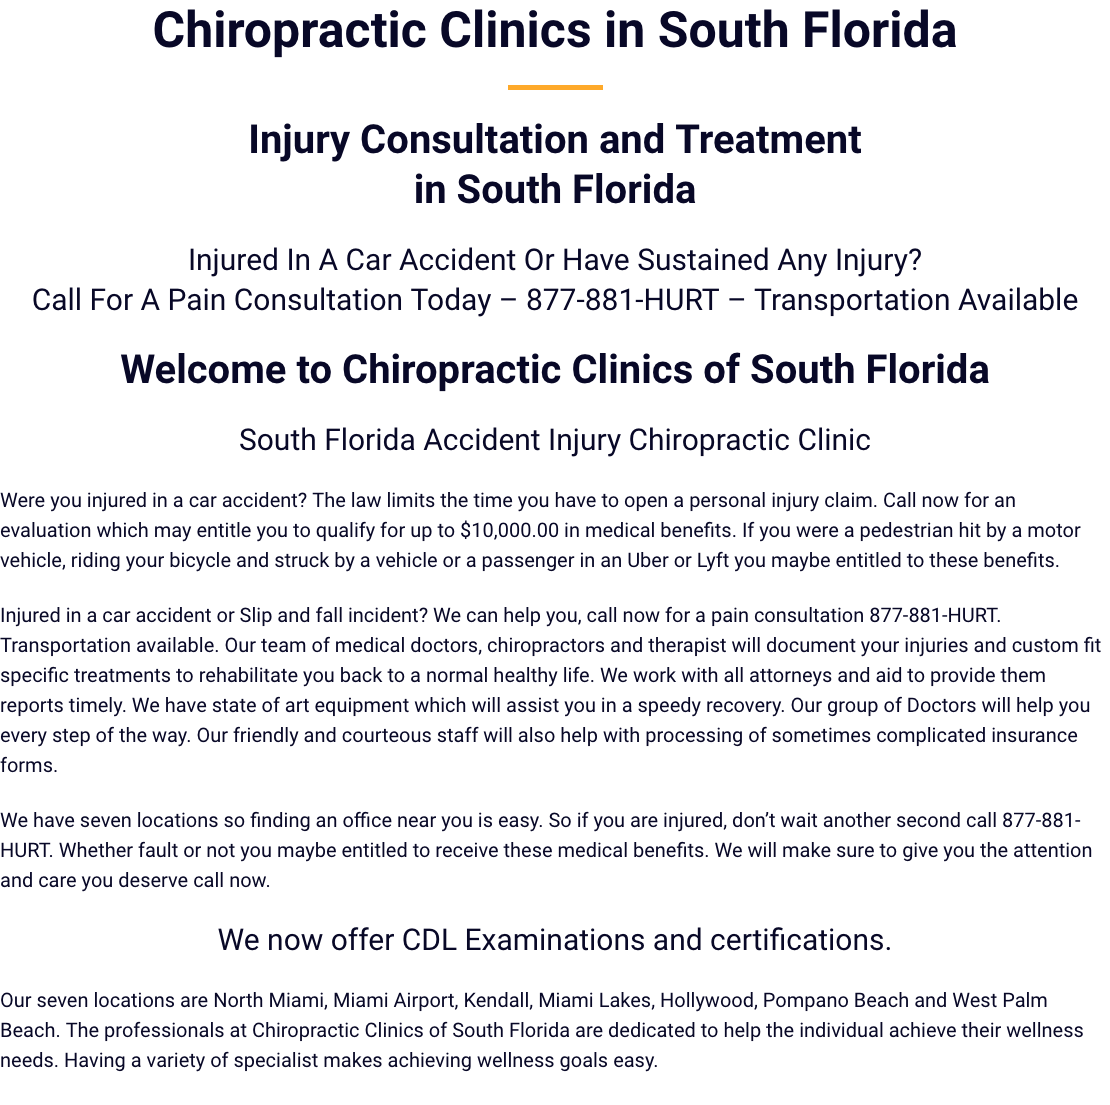 Chiropractic Clinics in South Florida